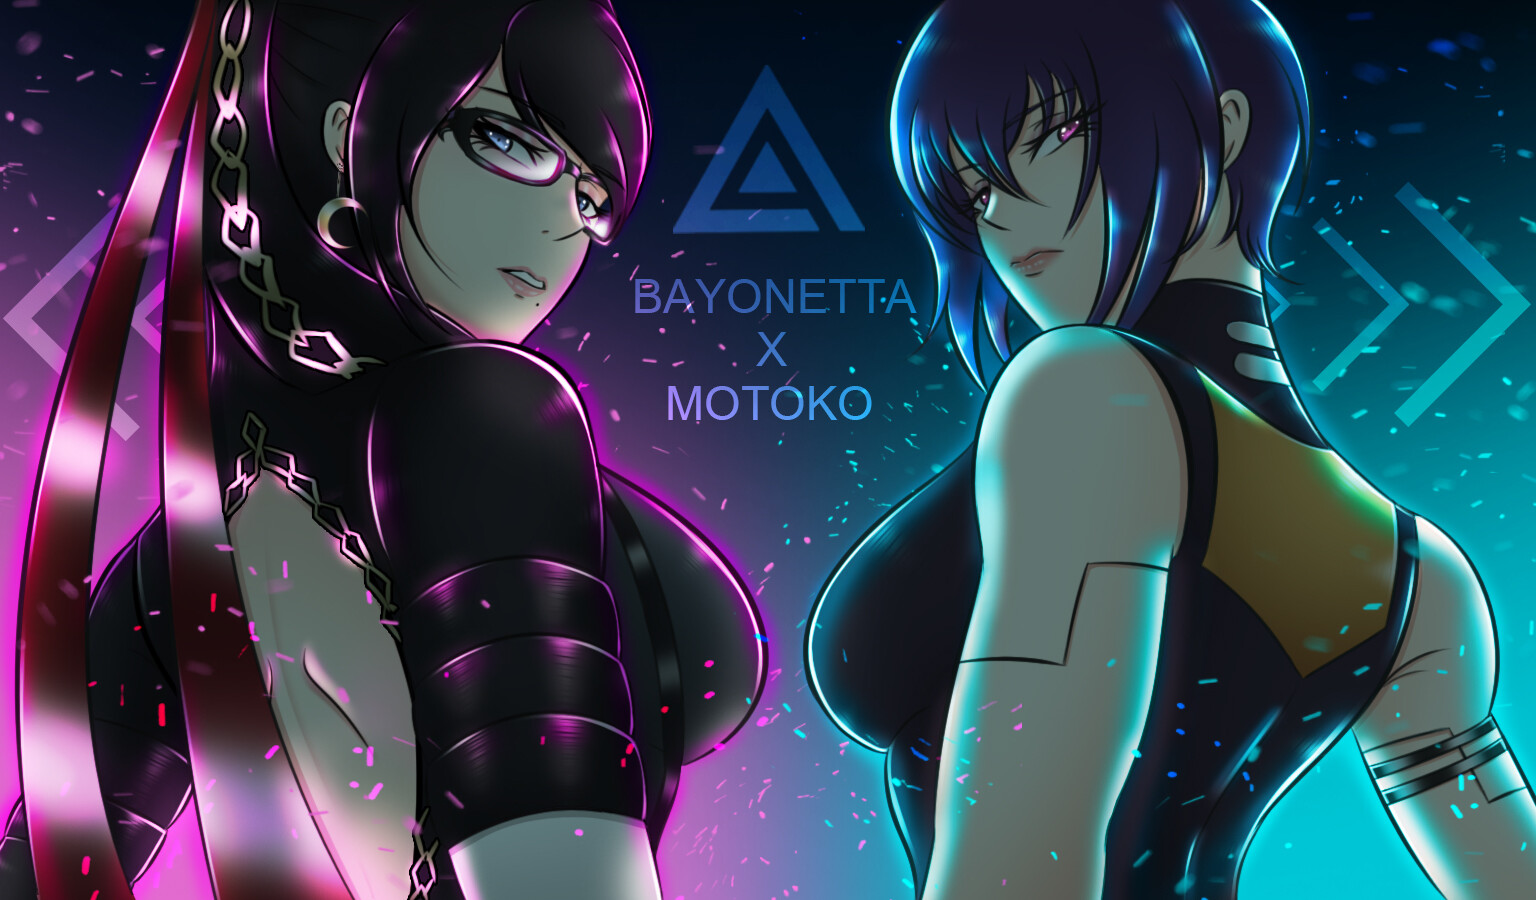 Bayonetta X Motoko from Ghost in the shell SAC_2045 by Voocartoon